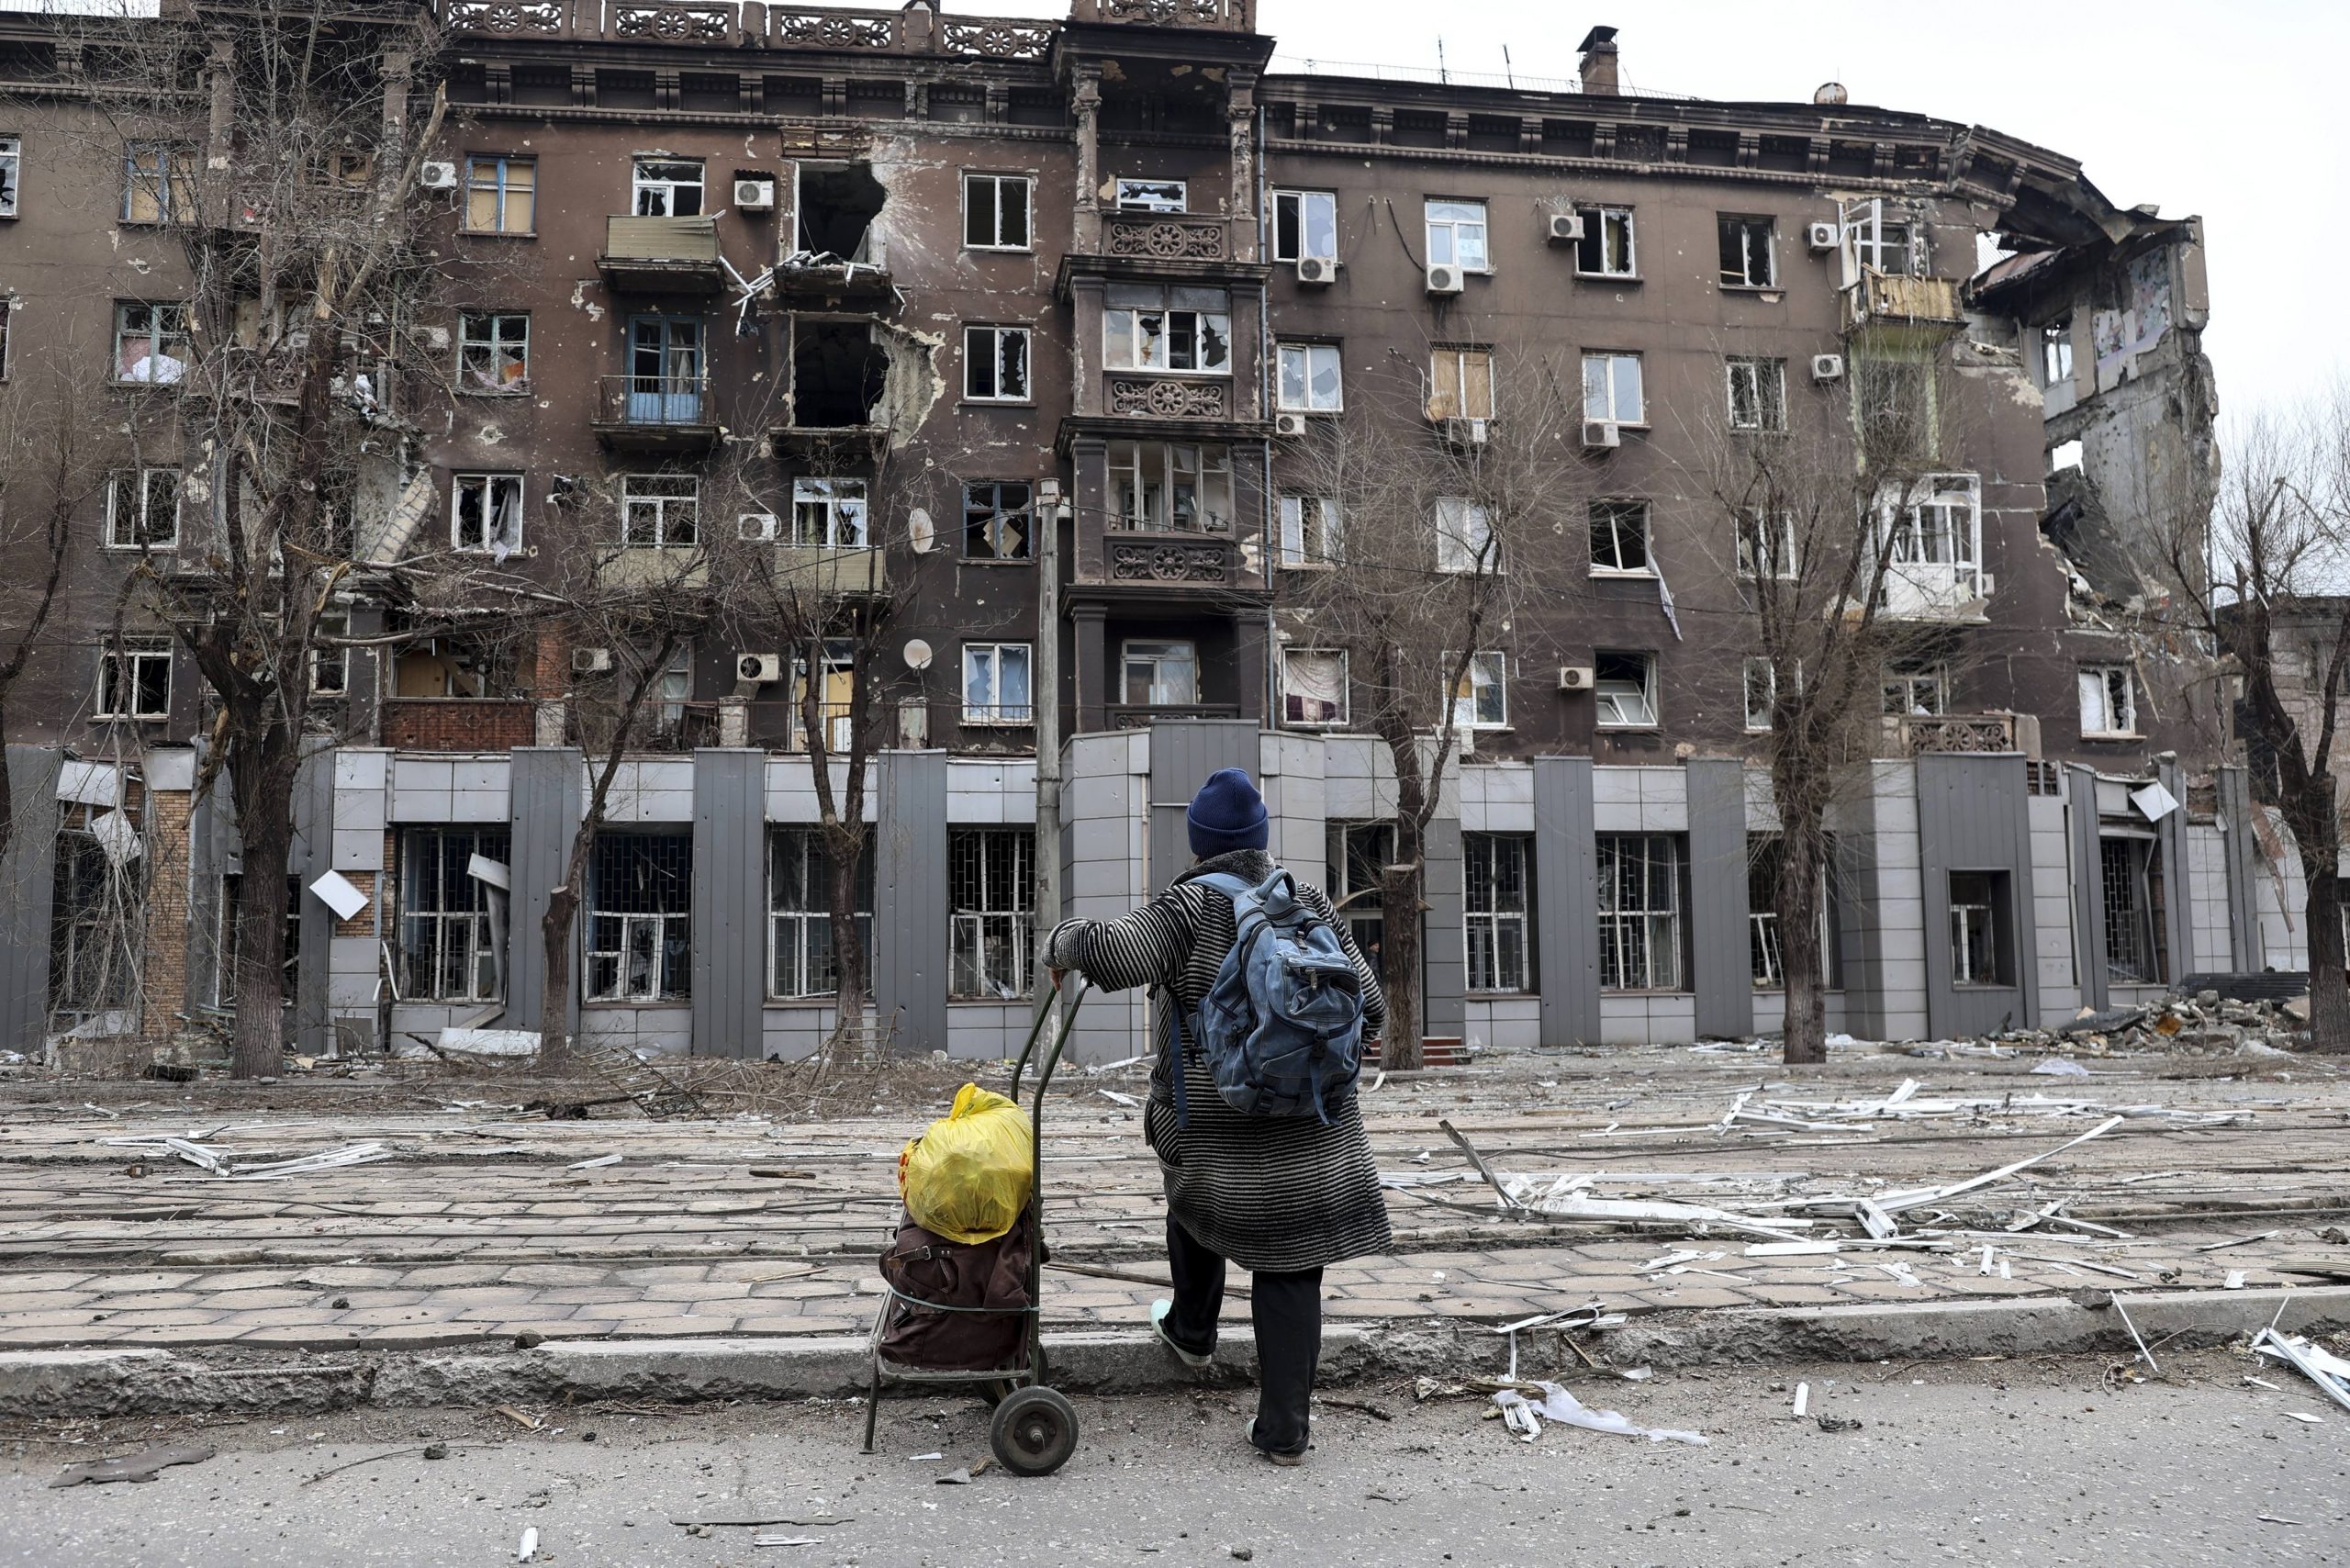 Russia sets new deadline for Ukraine Army to surrender in Mariupol: Report